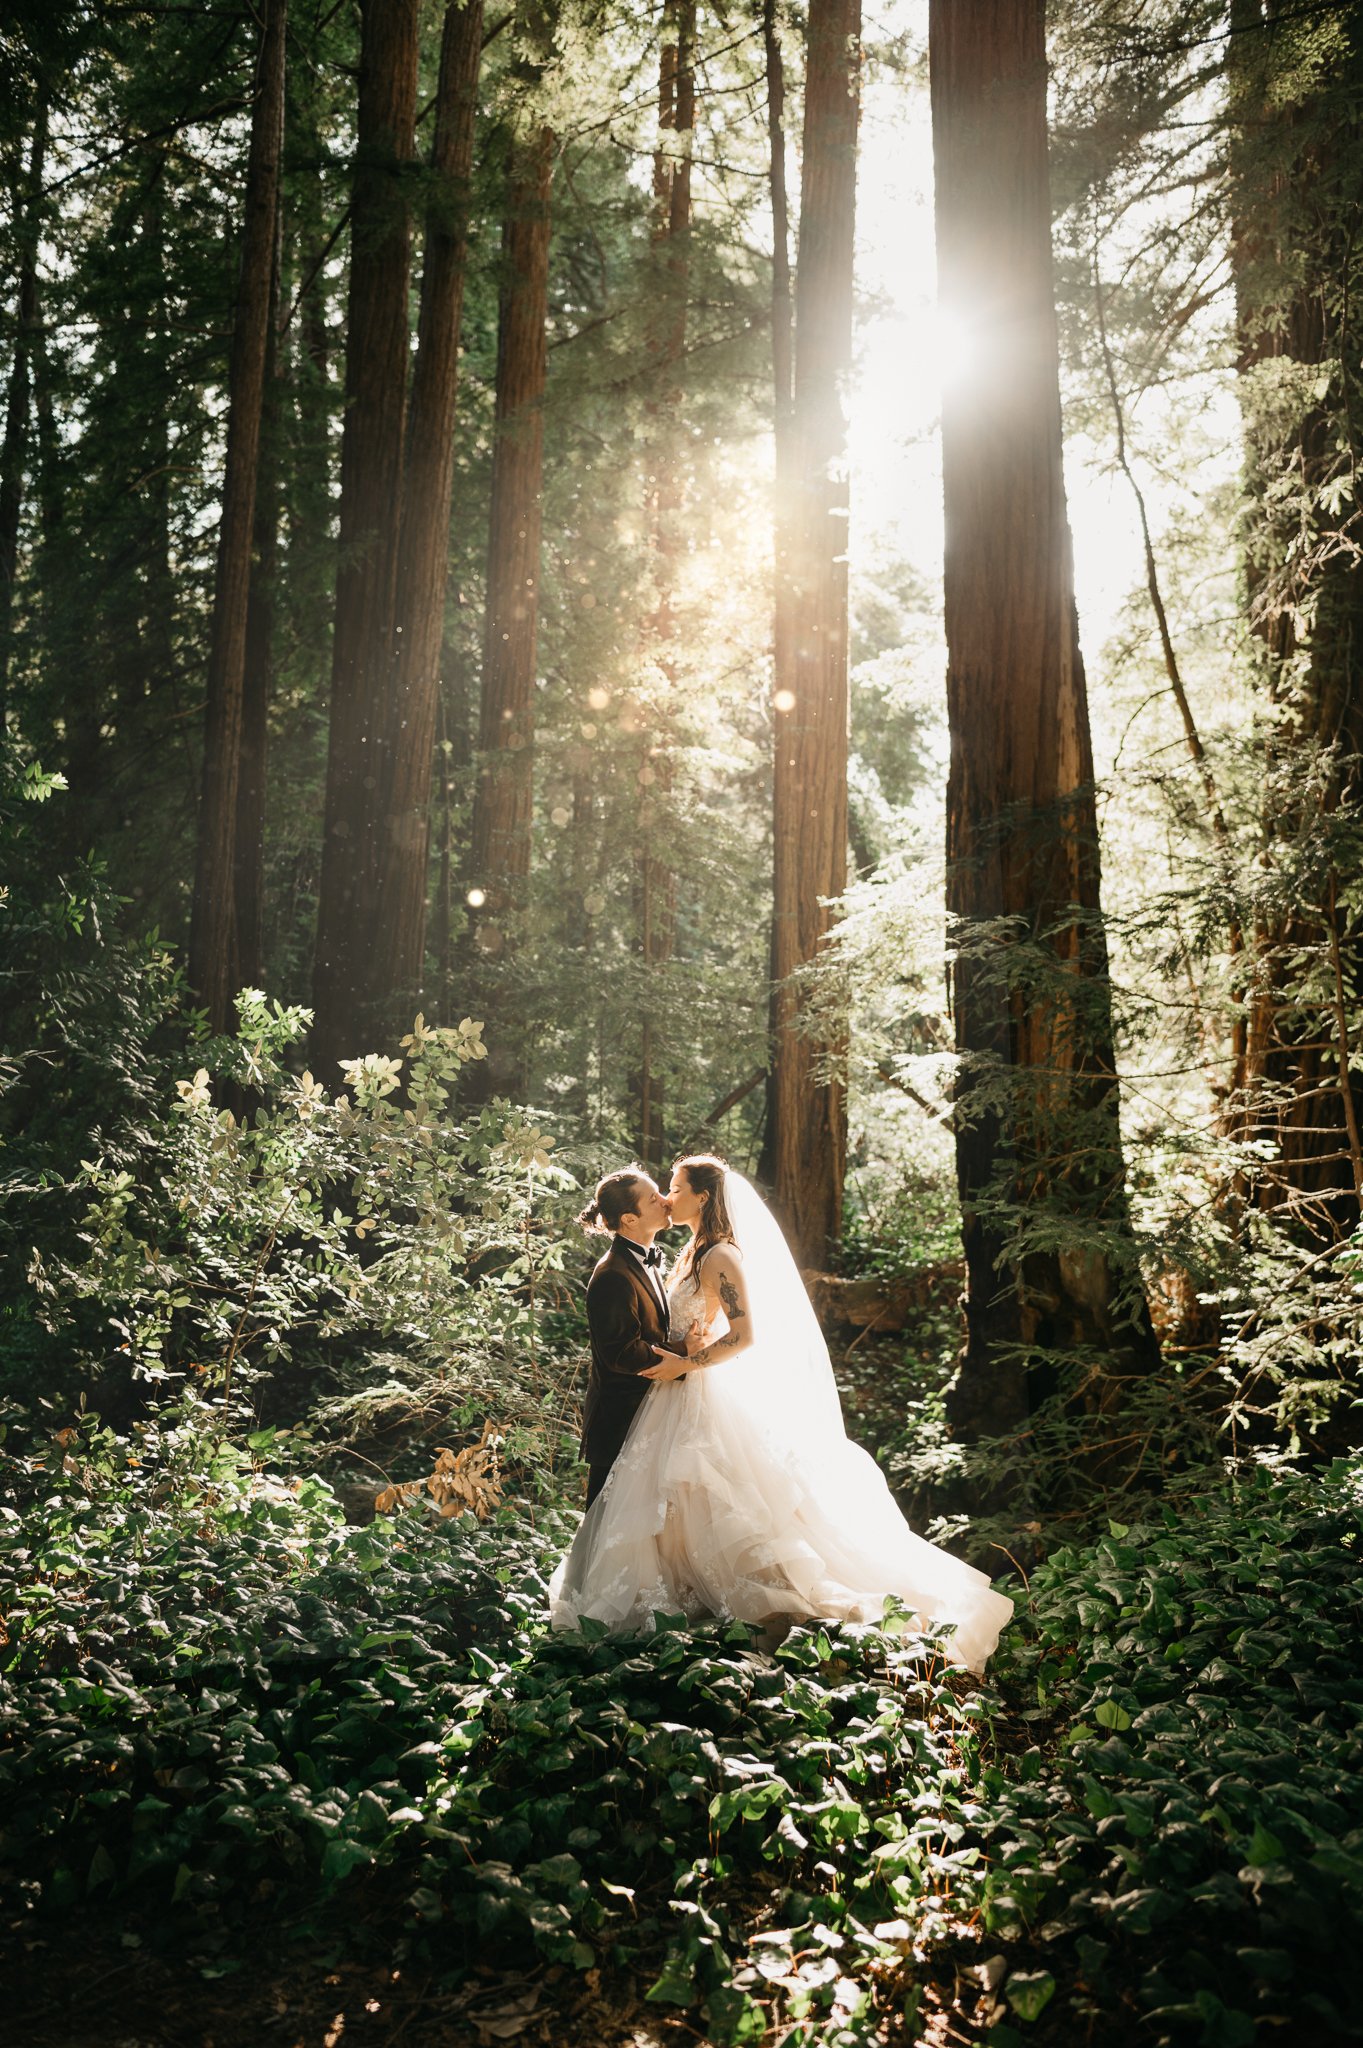 Big Sur Forest wedding bride and groom standing in forest sharing a kiss with sun peeking through the trees